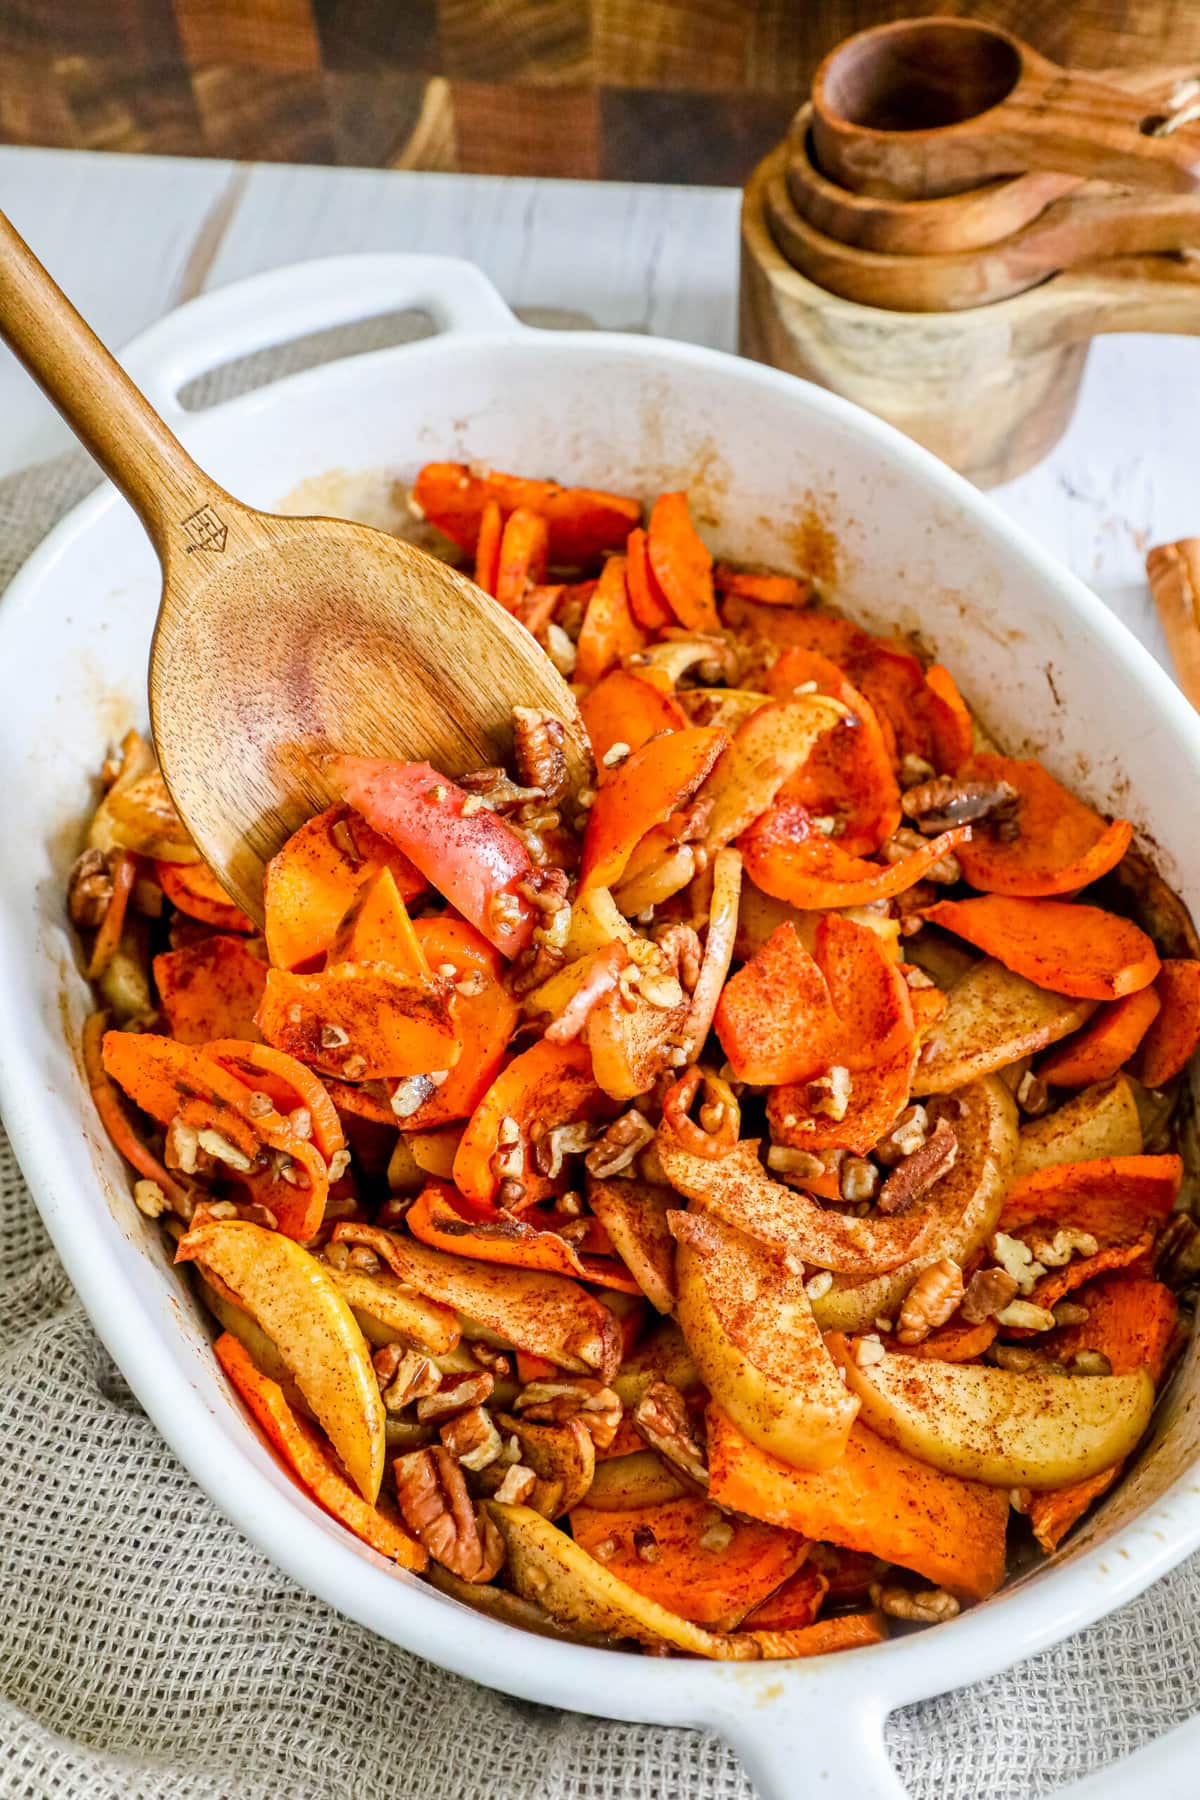 baked sweet potatoes and apples in a dish with cinnamon and nuts